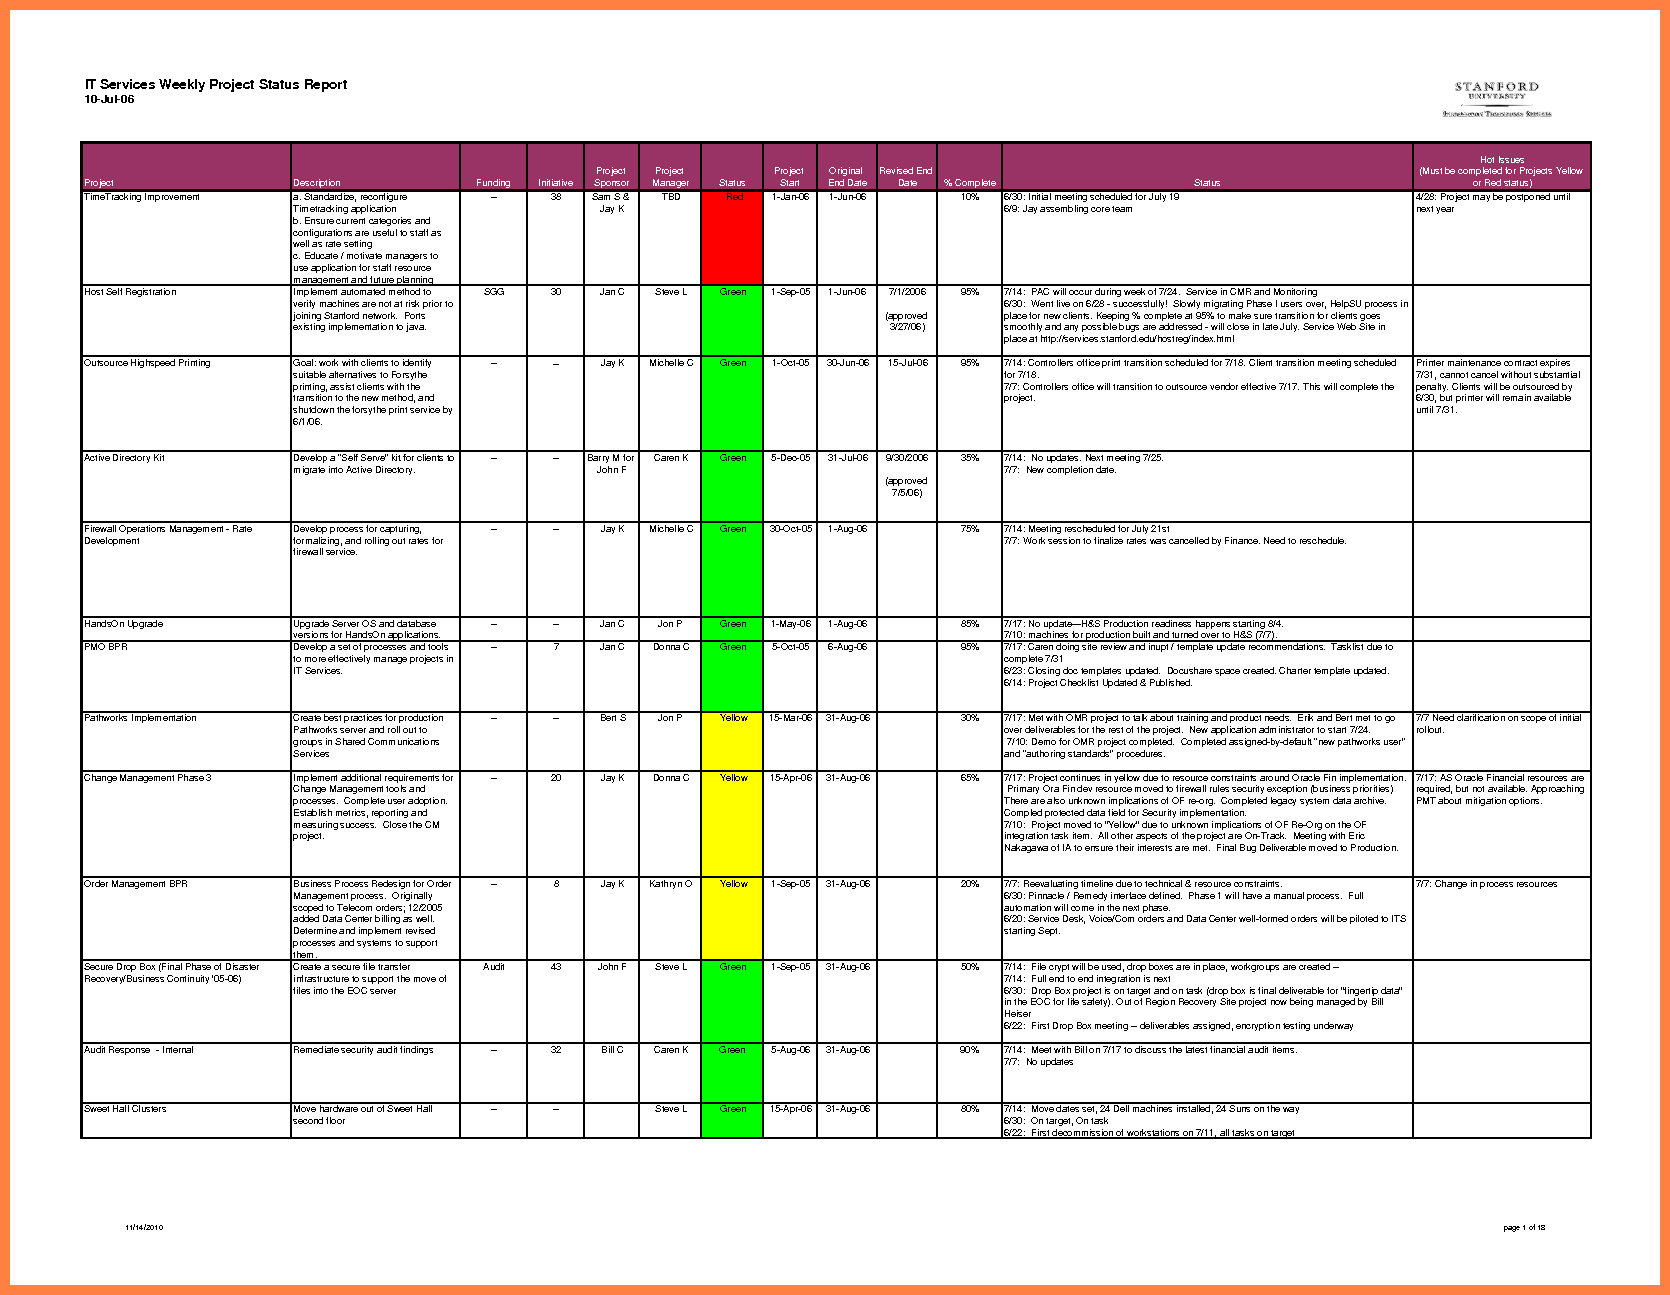 037 Status Report Template Excel Contract Management Intended For Project Weekly Status Report Template Excel